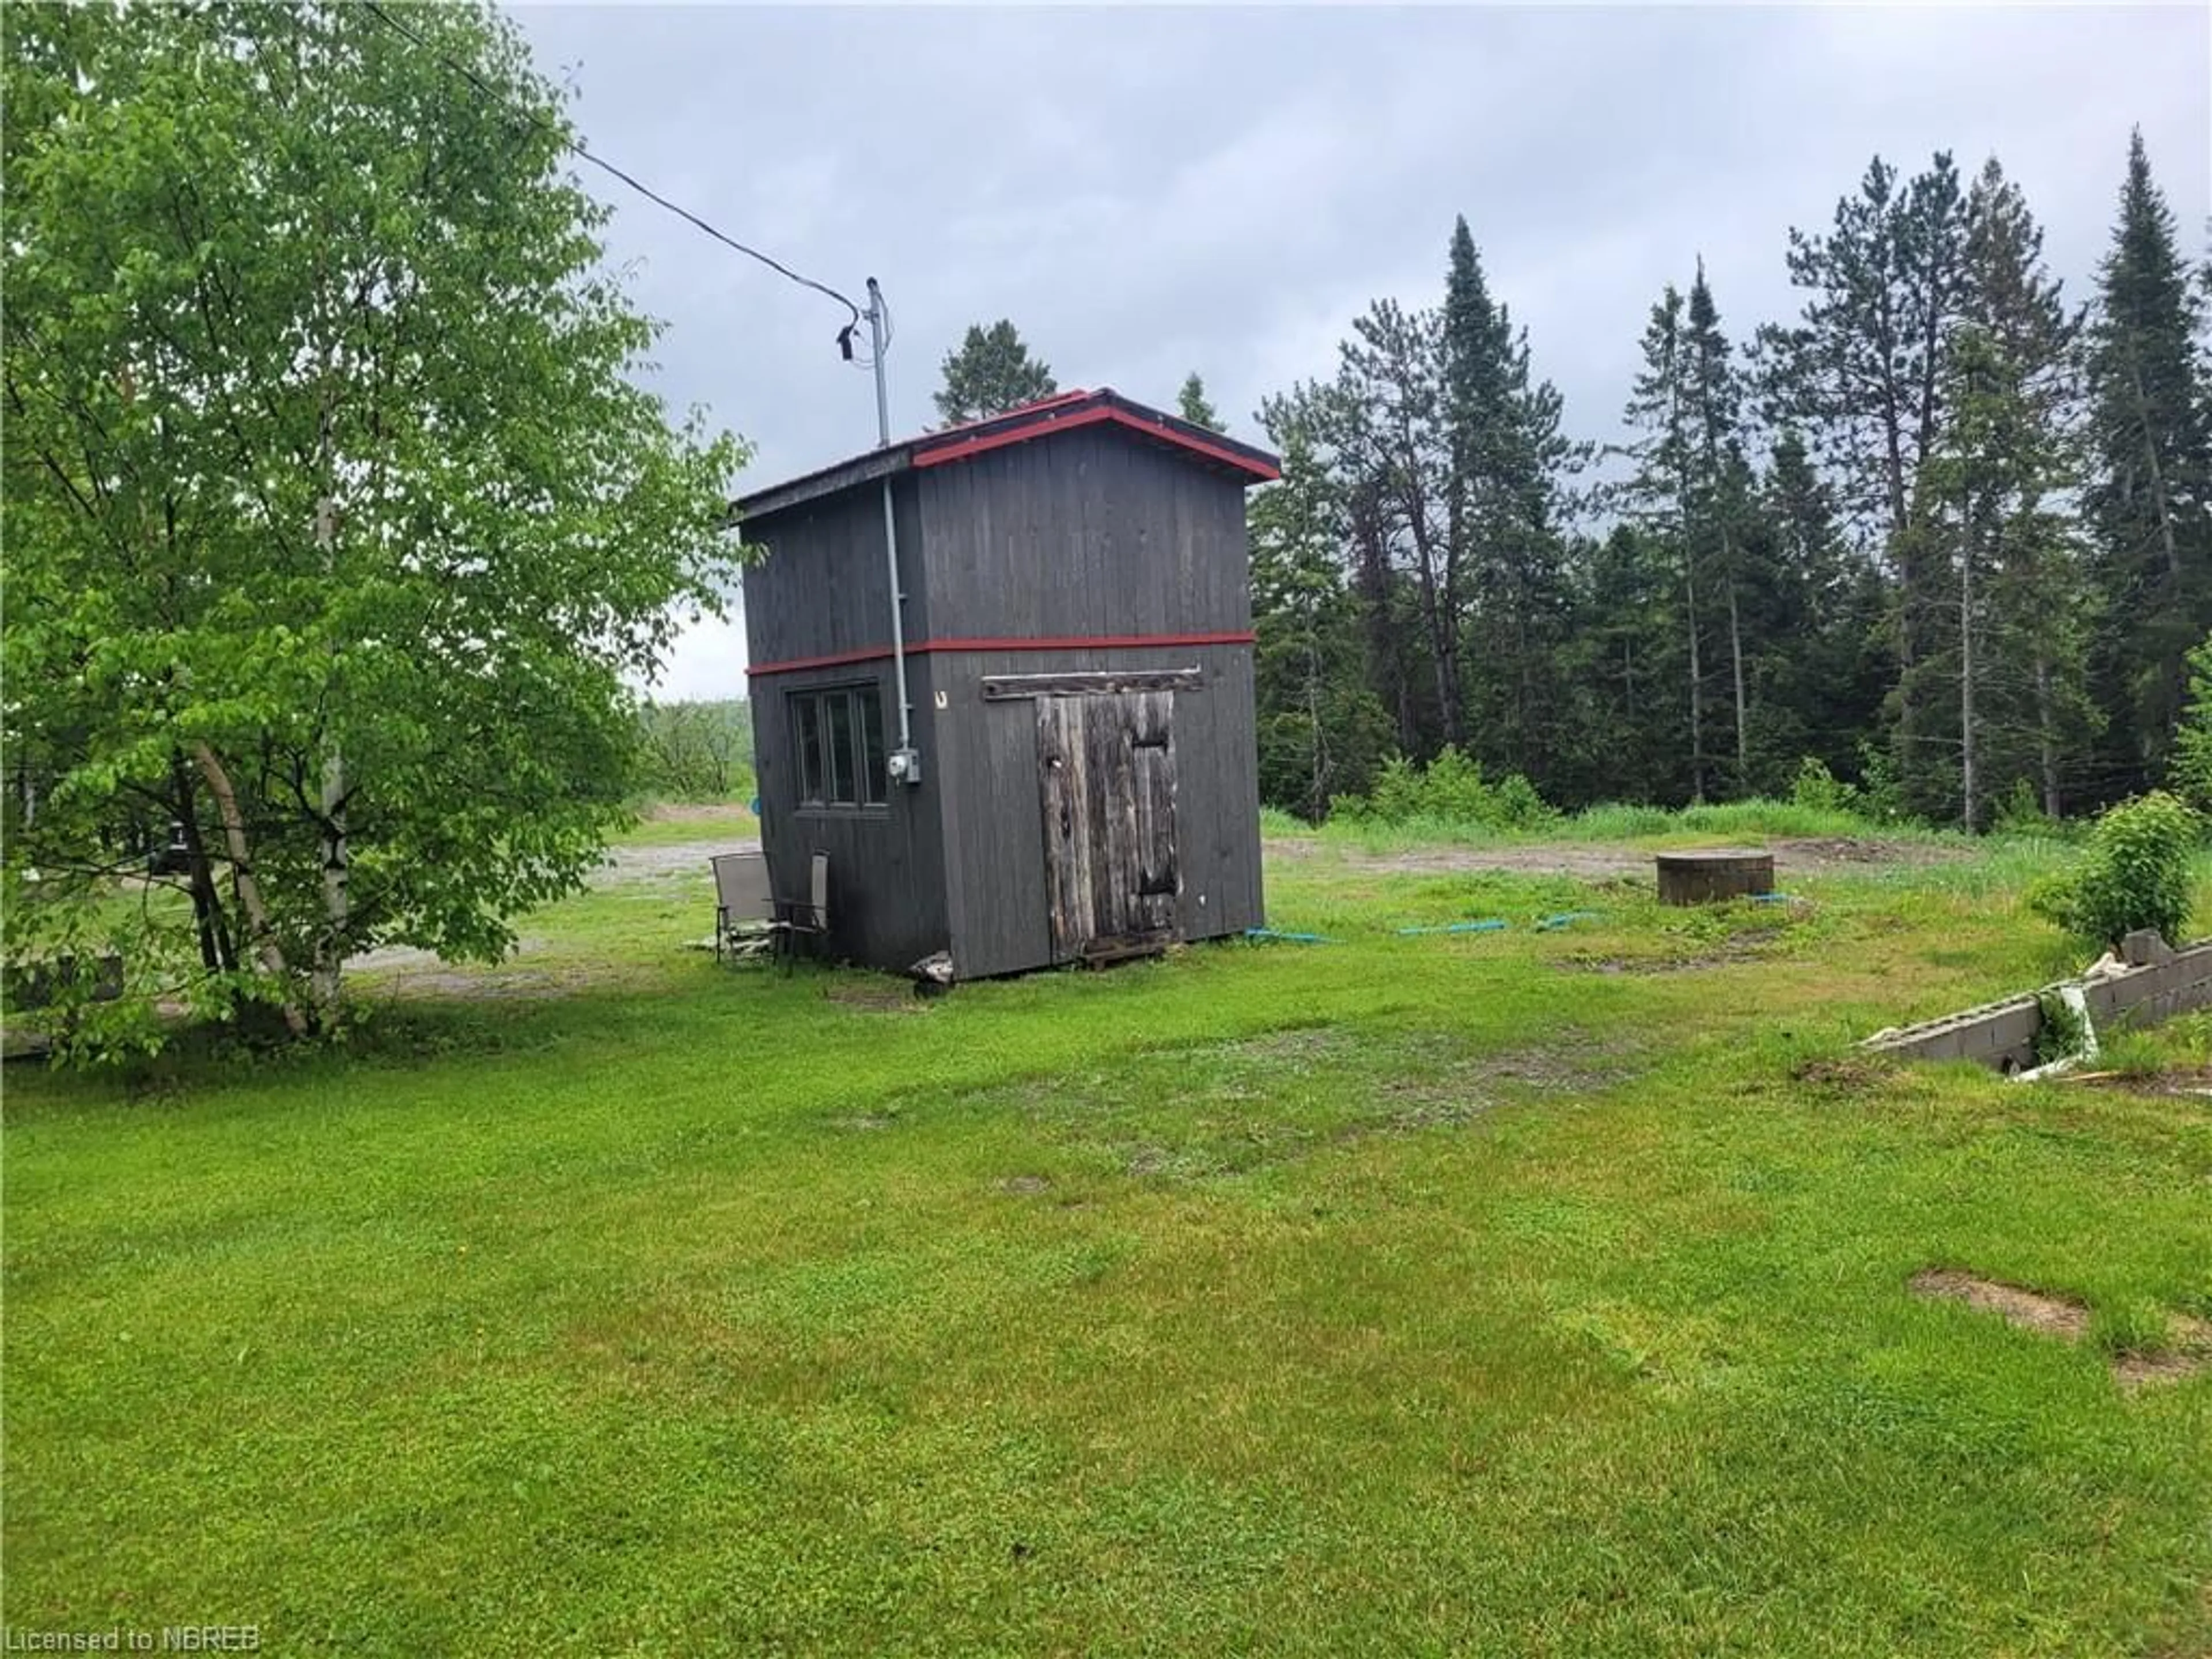 Shed for 188 Homestead Rd, Mattawa Ontario P0H 1V0